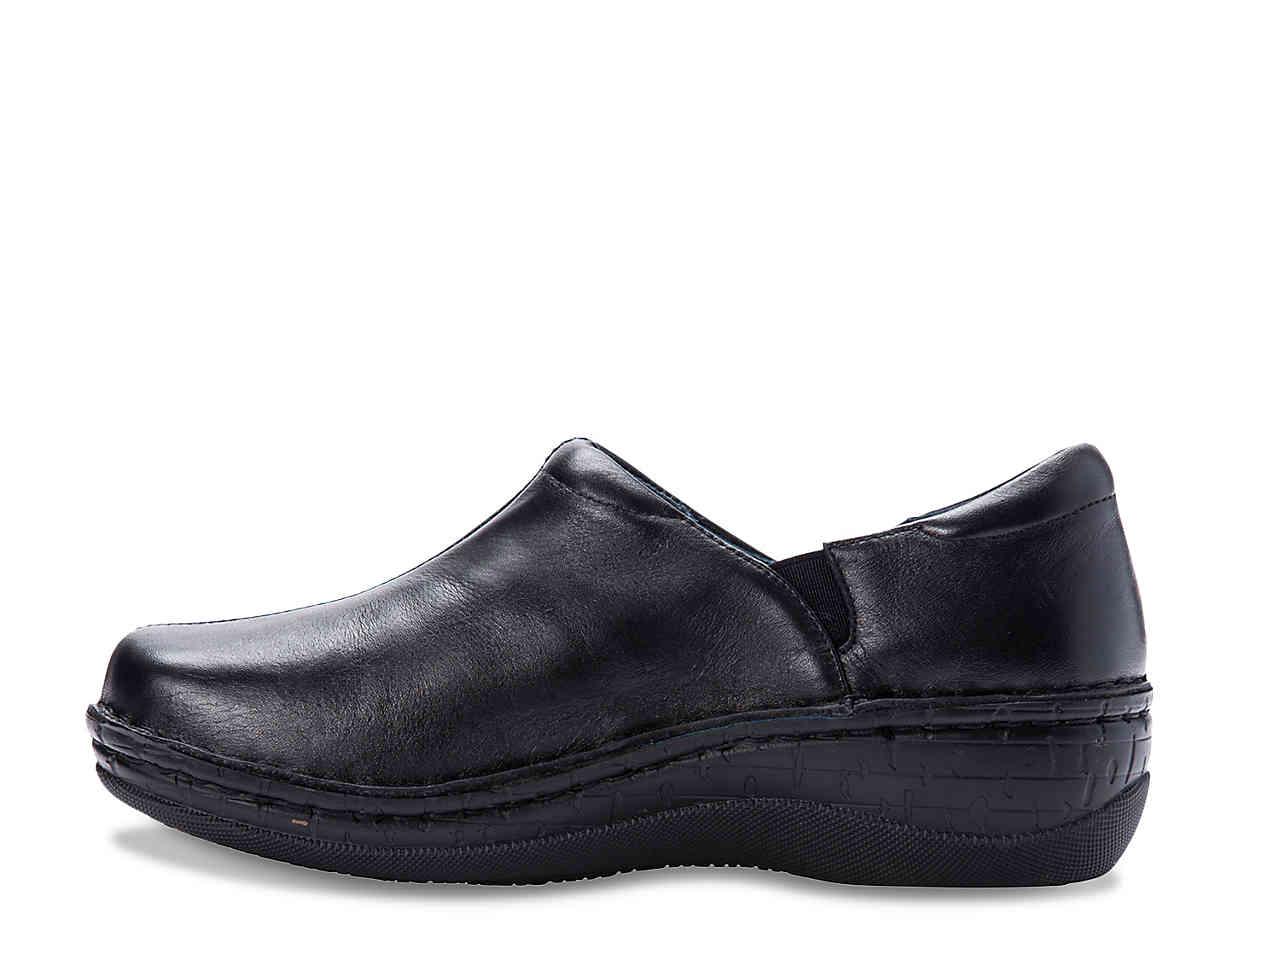 Propet Leather Jessica Work Clog in Black - Lyst